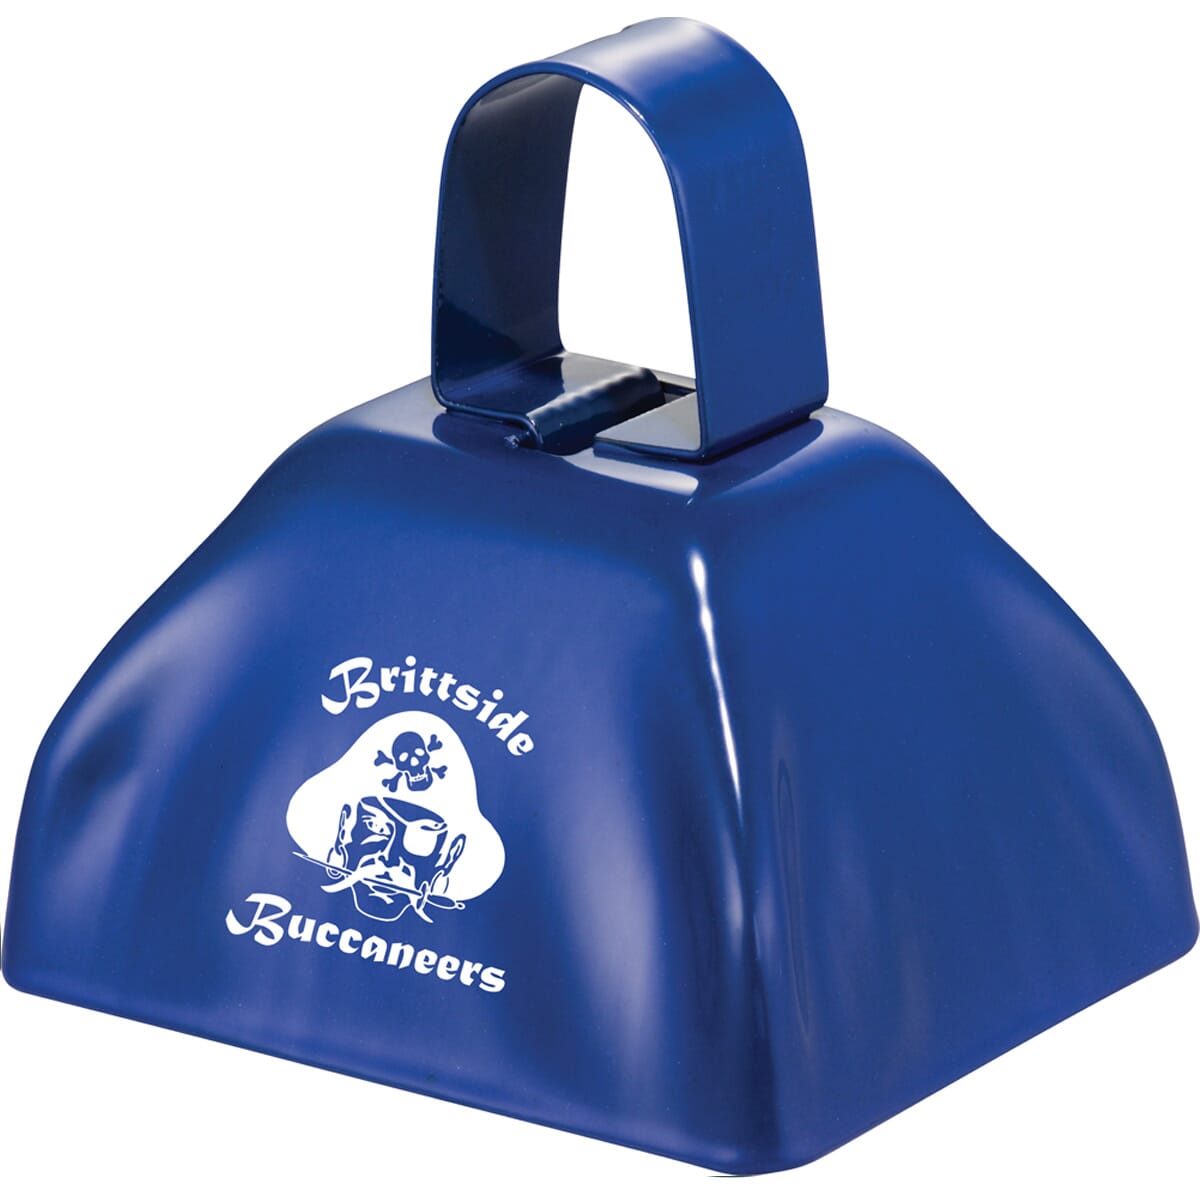 Royal blue cowbell with school logo and mascot